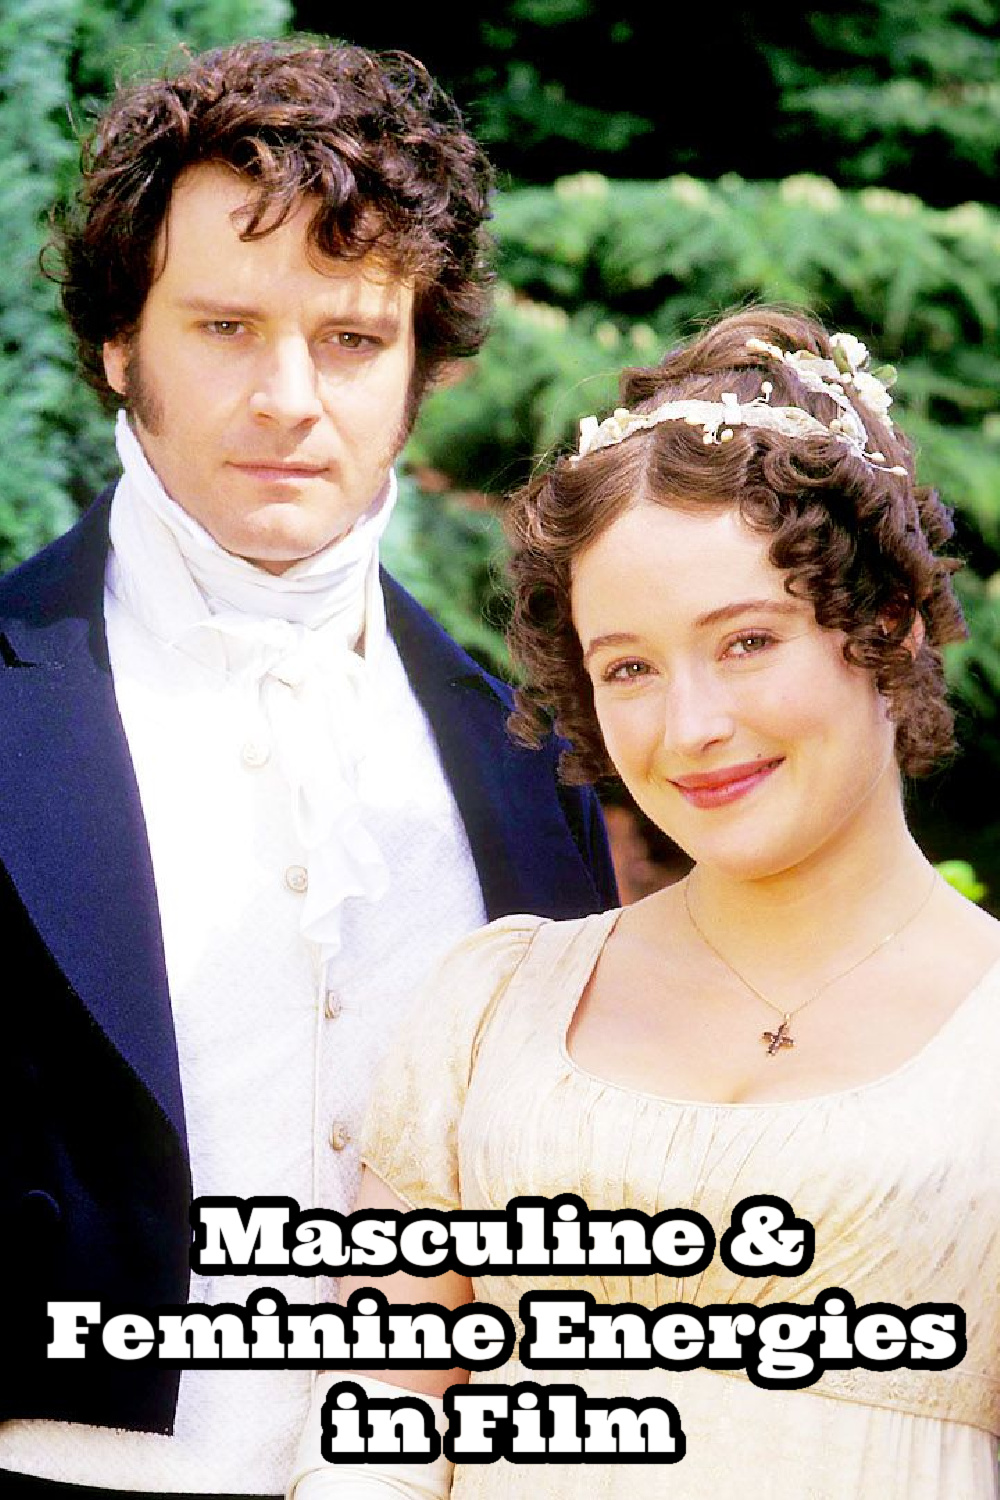 pride and prejudice 1995 analysis, wild woman archetype, wild woman archetype traits, light and dark feminine energy, difference between dark and light feminine energy, dark feminine, dark feminine energy, dark femininity, elizabeth bennet femininity, elizabeth bennet personality, mr darcy masculinity, the dark feminine mans greatest paradox, why men are attracted to women with high standards, masculine and feminine energy, masculine and feminine energy in relationships, understanding masculine and feminine energy, sexual polarity in relationships, sexual polarity, Everyday starlet, sarah blodgett,